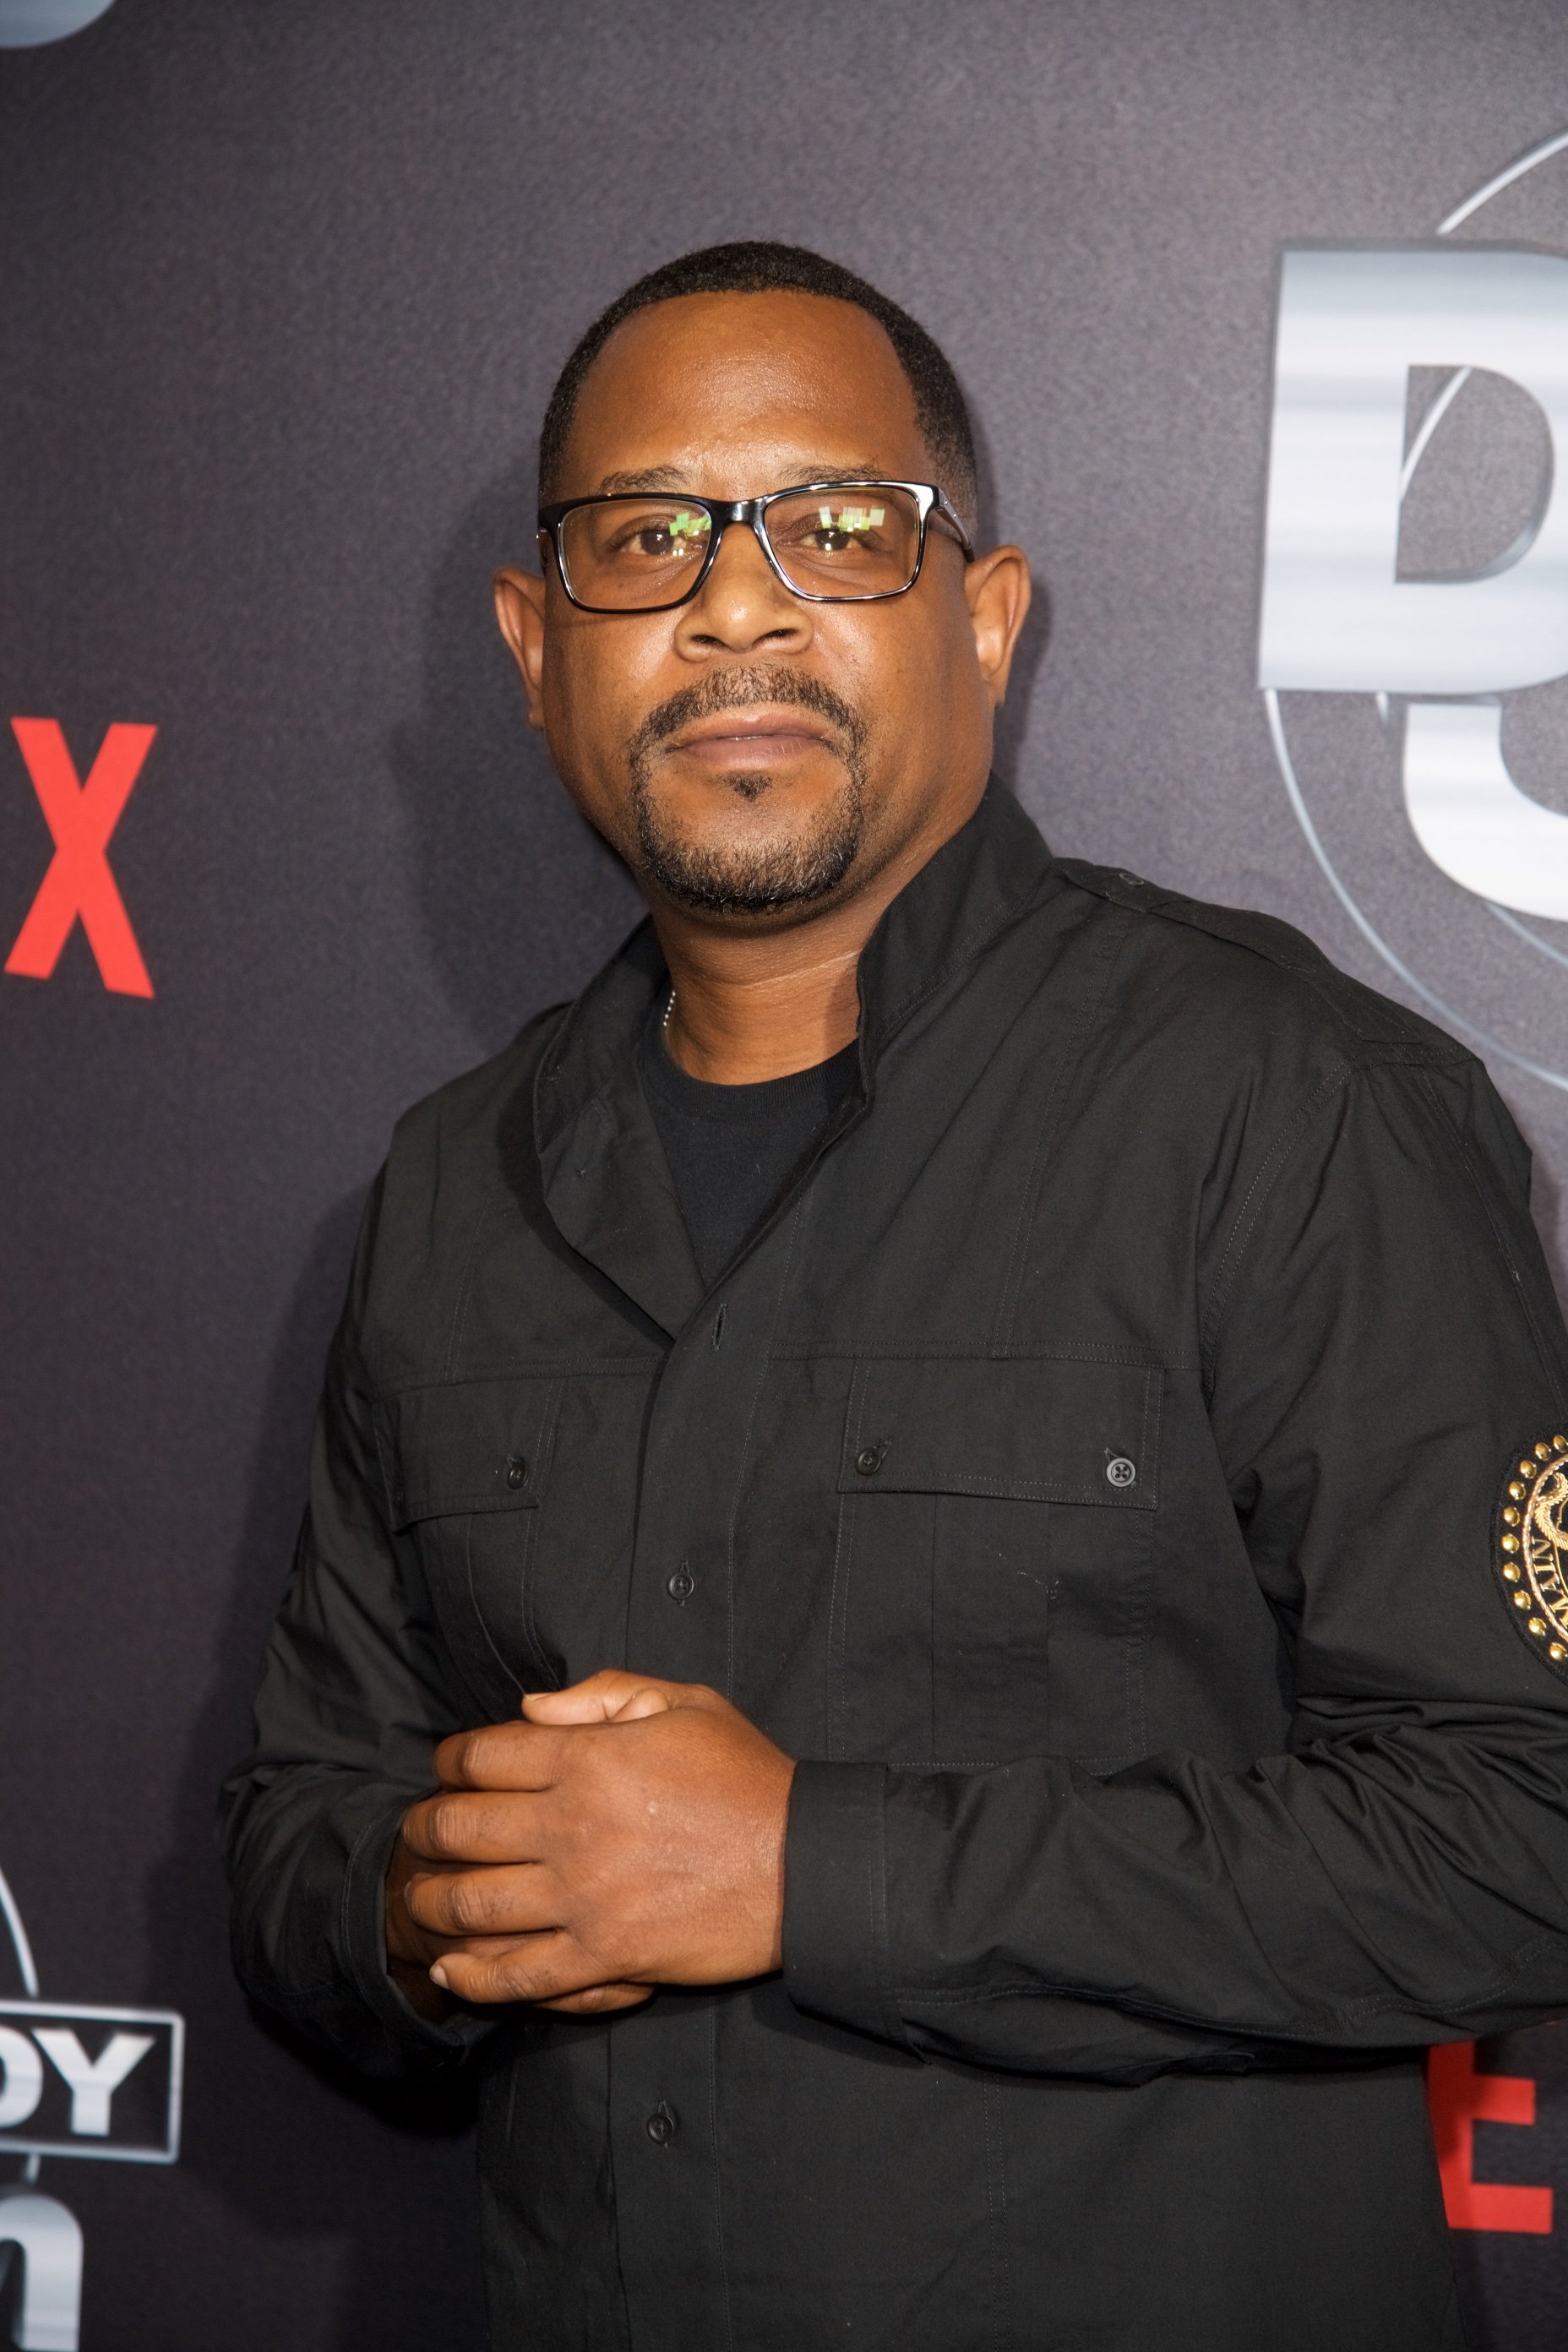 Martin Lawrence at Netflix Presents Russell Simmons "Def Comedy Jam 25" Special Event on Sept. 10, 2017. | Photo: Getty Images